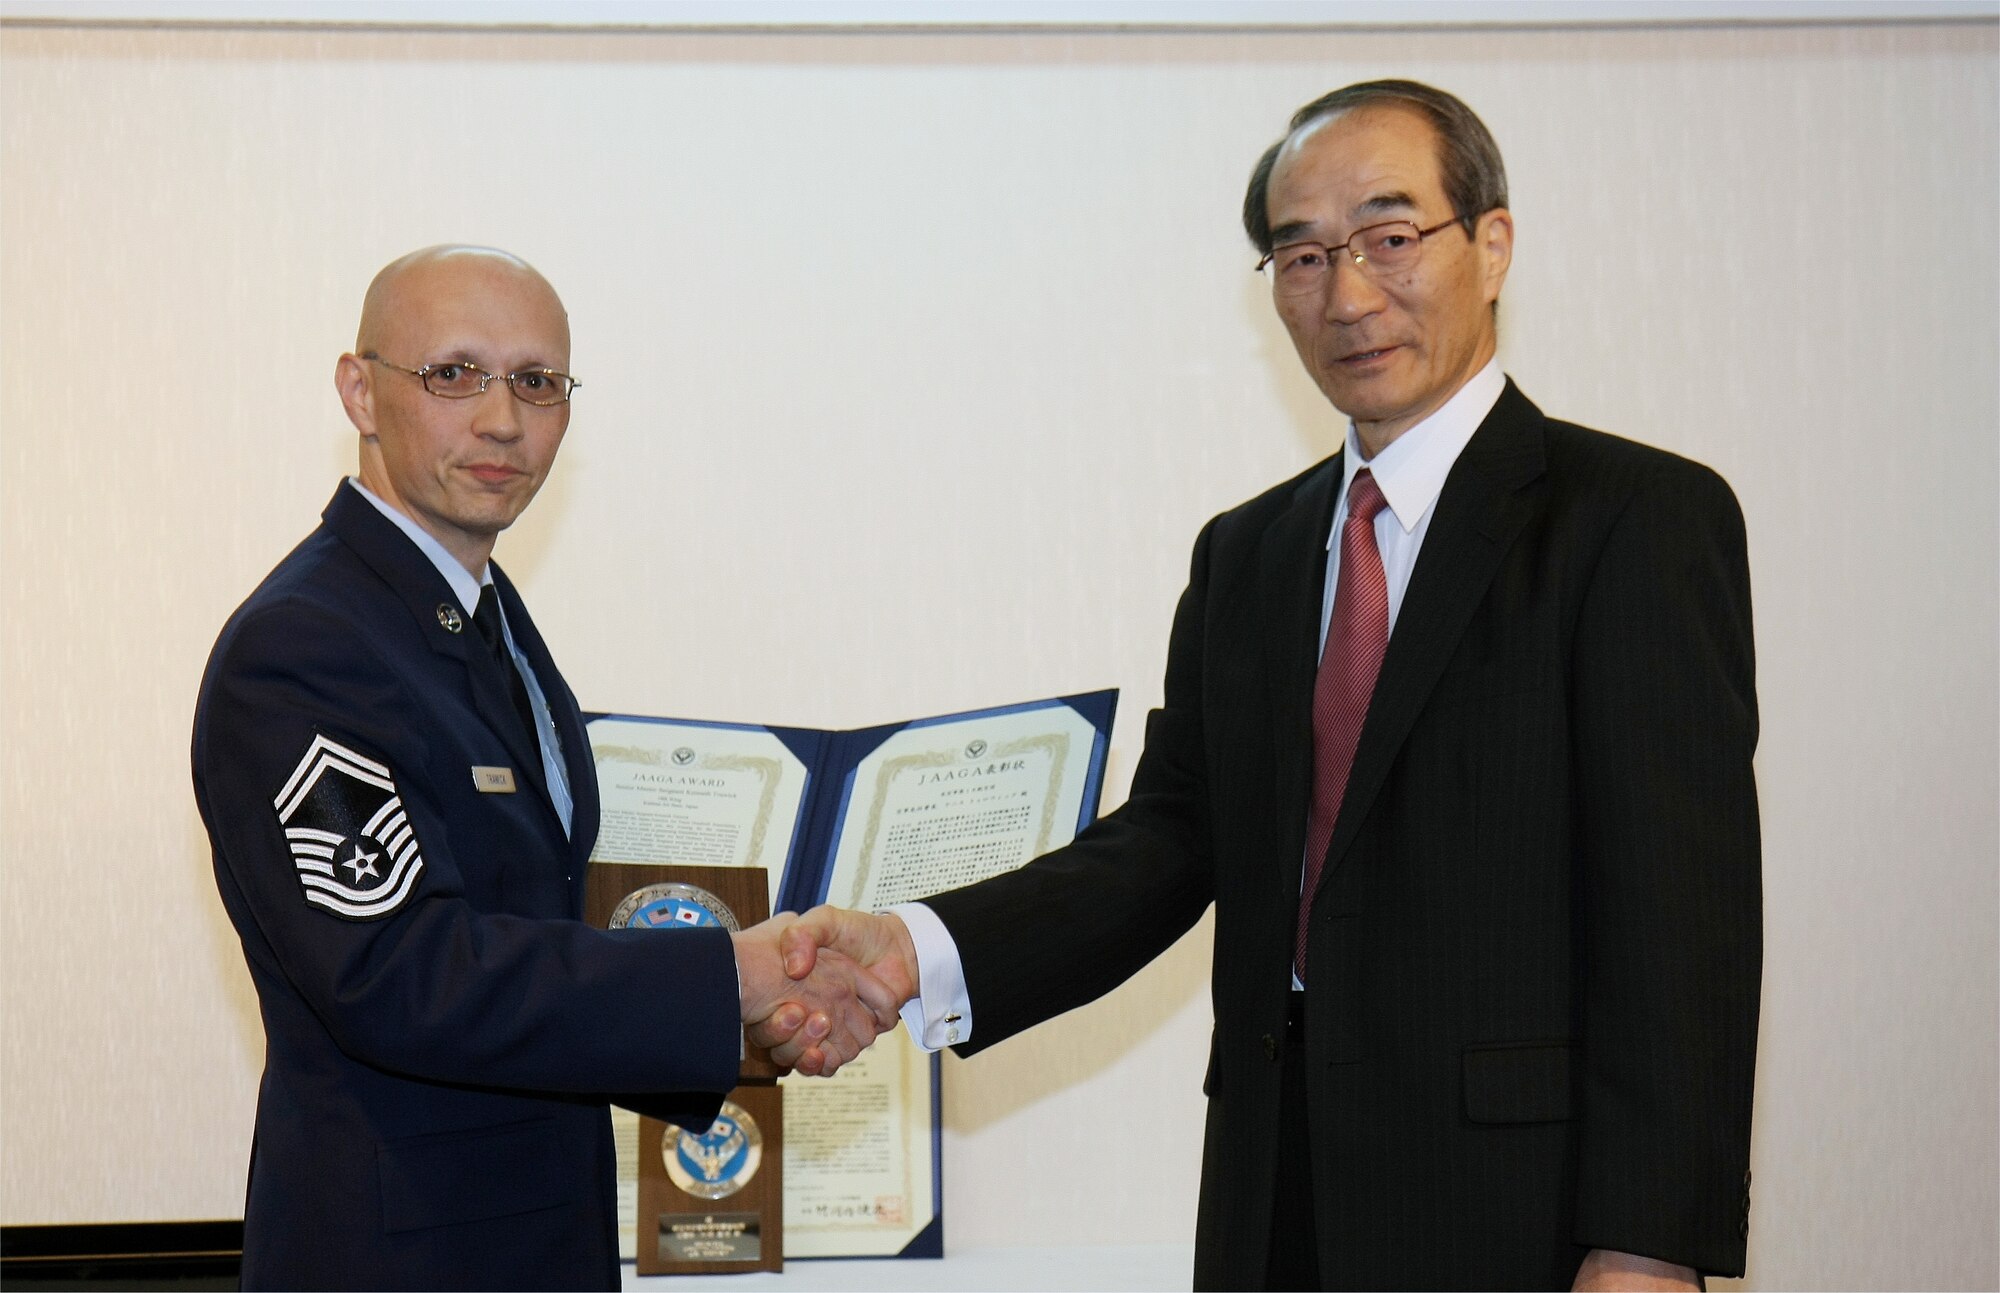 Senior Master Sgt. Kenneth Trawick, 18th Wing AFSO 21 process manager, was recognized in a ceremony Feb. 8 by the Japan-American Air Force Goodwill Association for his efforts setting up exchange programs between Kadena and Japanese Air Self Defense Force Airmen. Retired JASDF Gen. Shoji Takegochi presided over the ceremony and presented Sergeant Trawick with the award, which consisted of a plaque and citation in both English and Japanese. He praised Sergeant Trawick's work to enhance camaraderie and teamwork between the two Air Forces. (Courtesy photo)